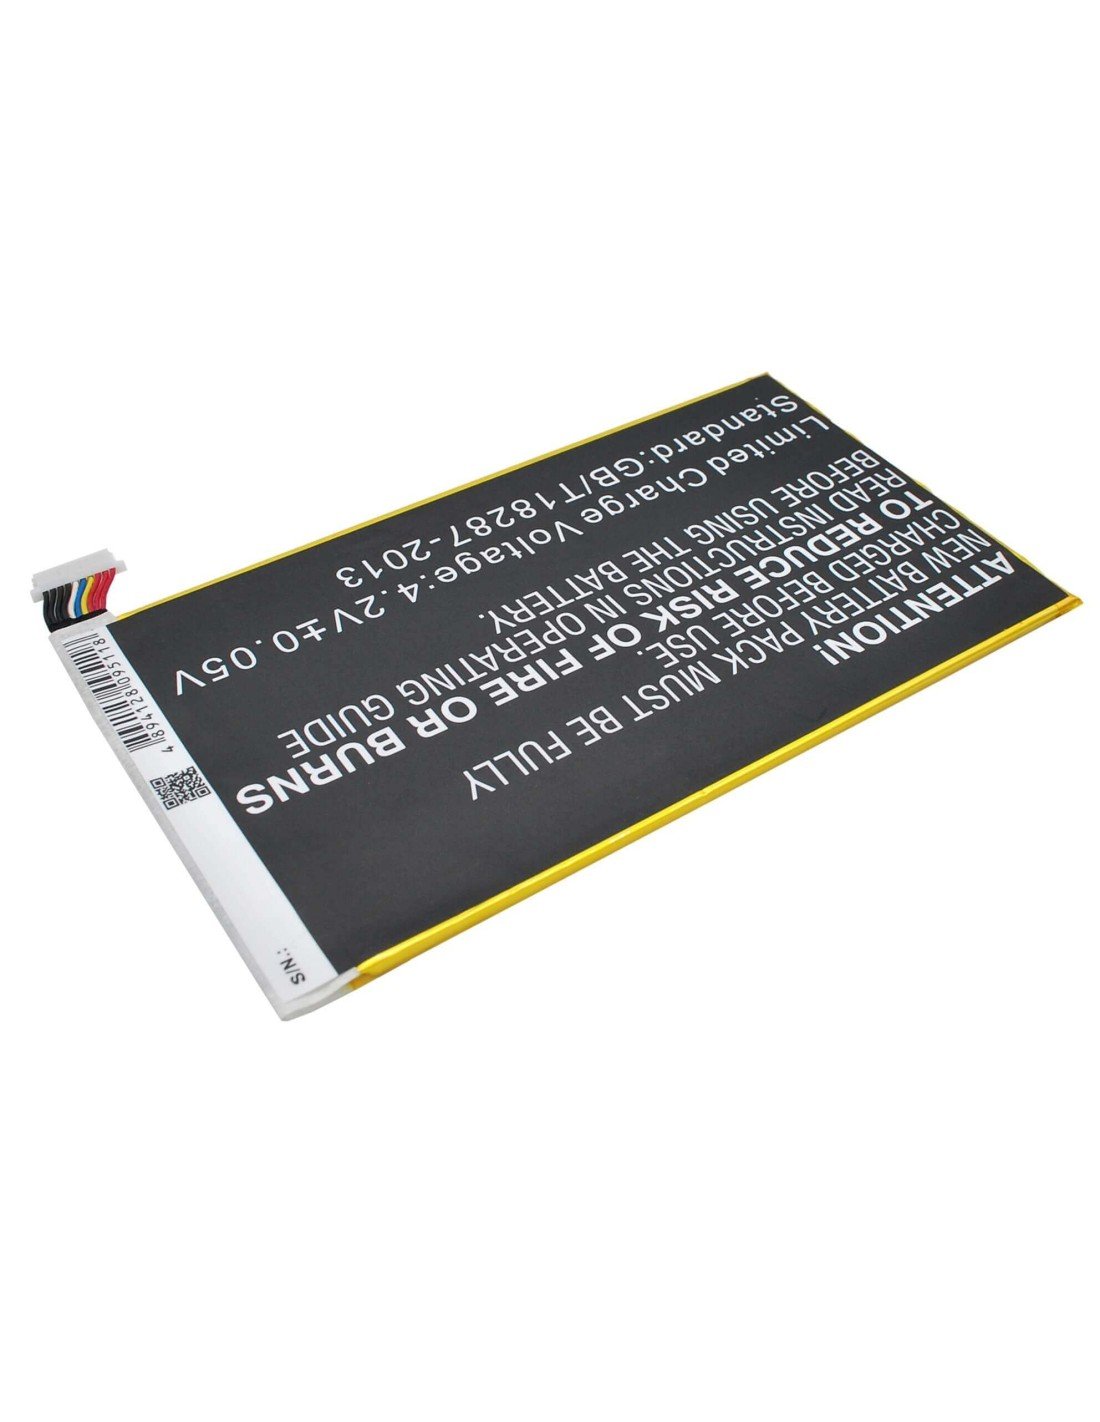 Battery for Amazon Kindle Hdx 7.0, P48wvb4, Kindle Fire Hd 3rd 3.7V, 4400mAh - 16.28Wh